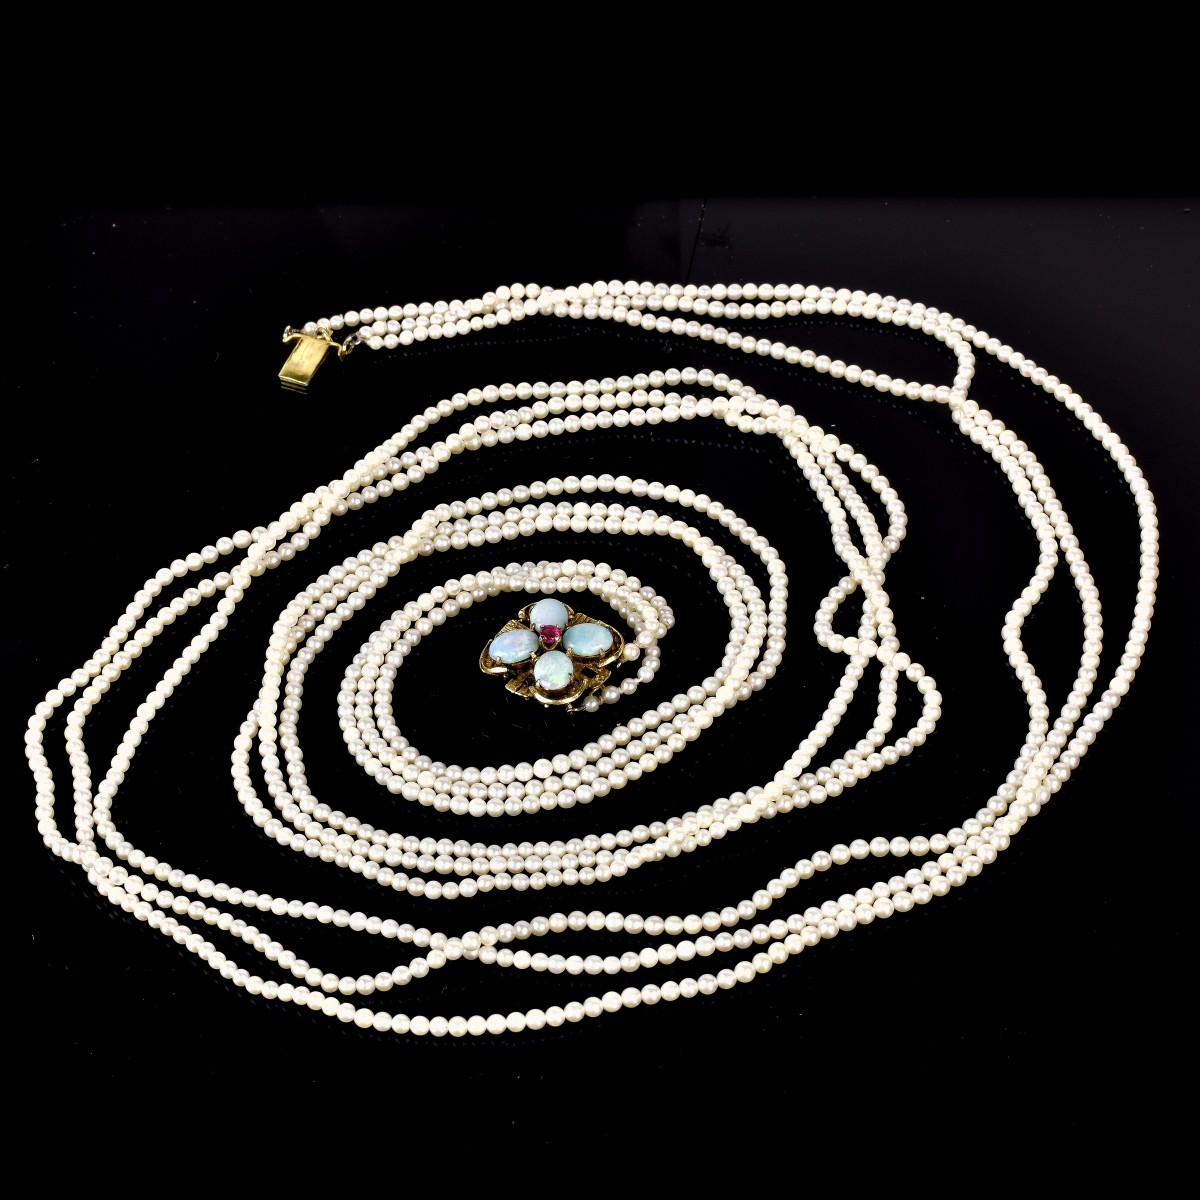 42" L Pearl Necklace with Opal and 14K Gold Clasp